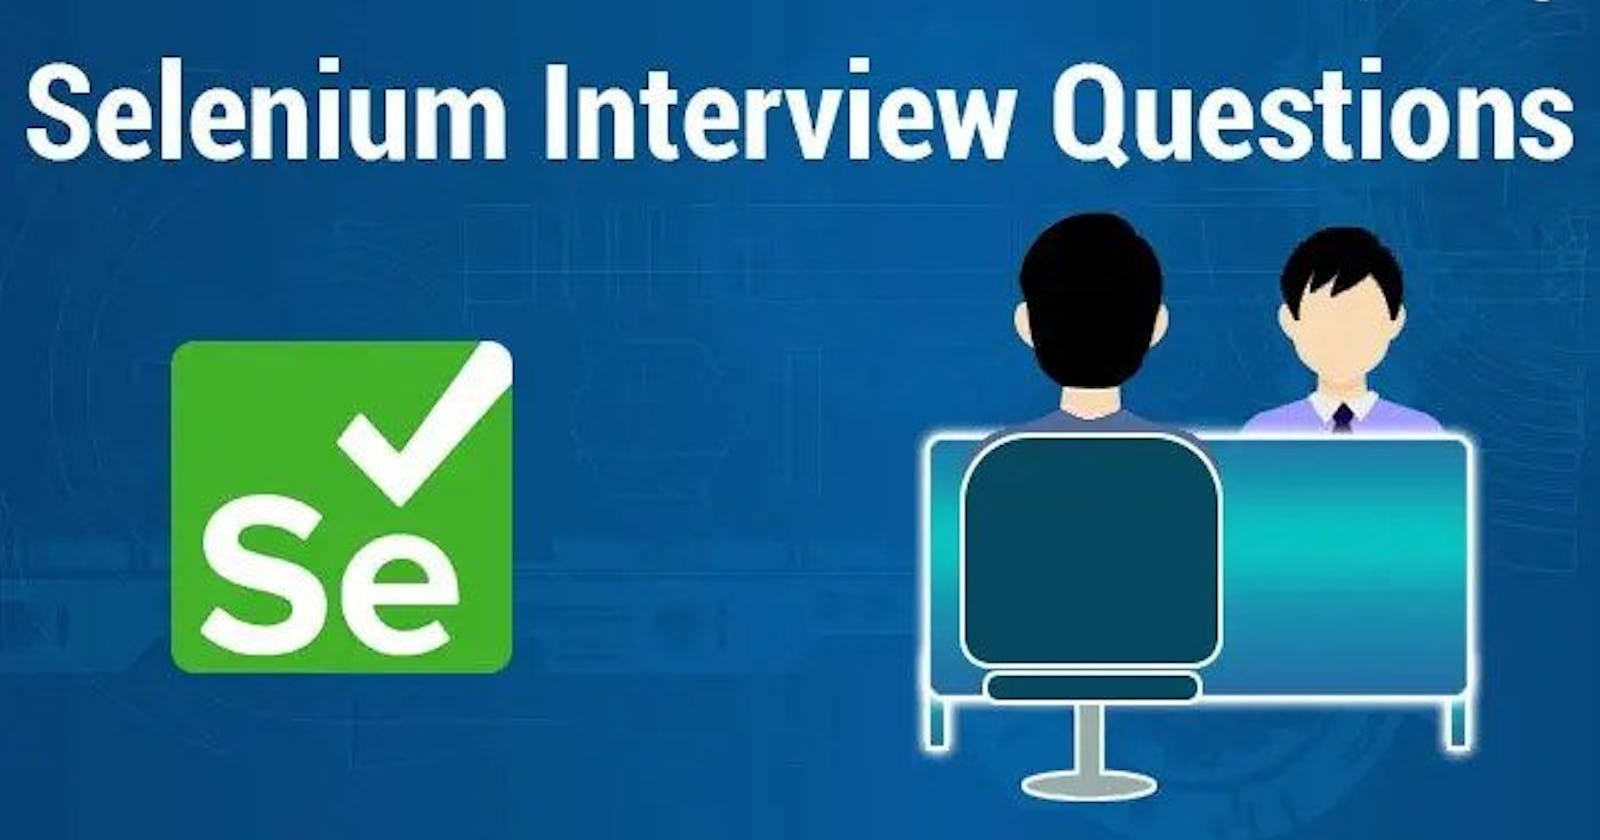 Top interview questions asked in a Selenium interview.